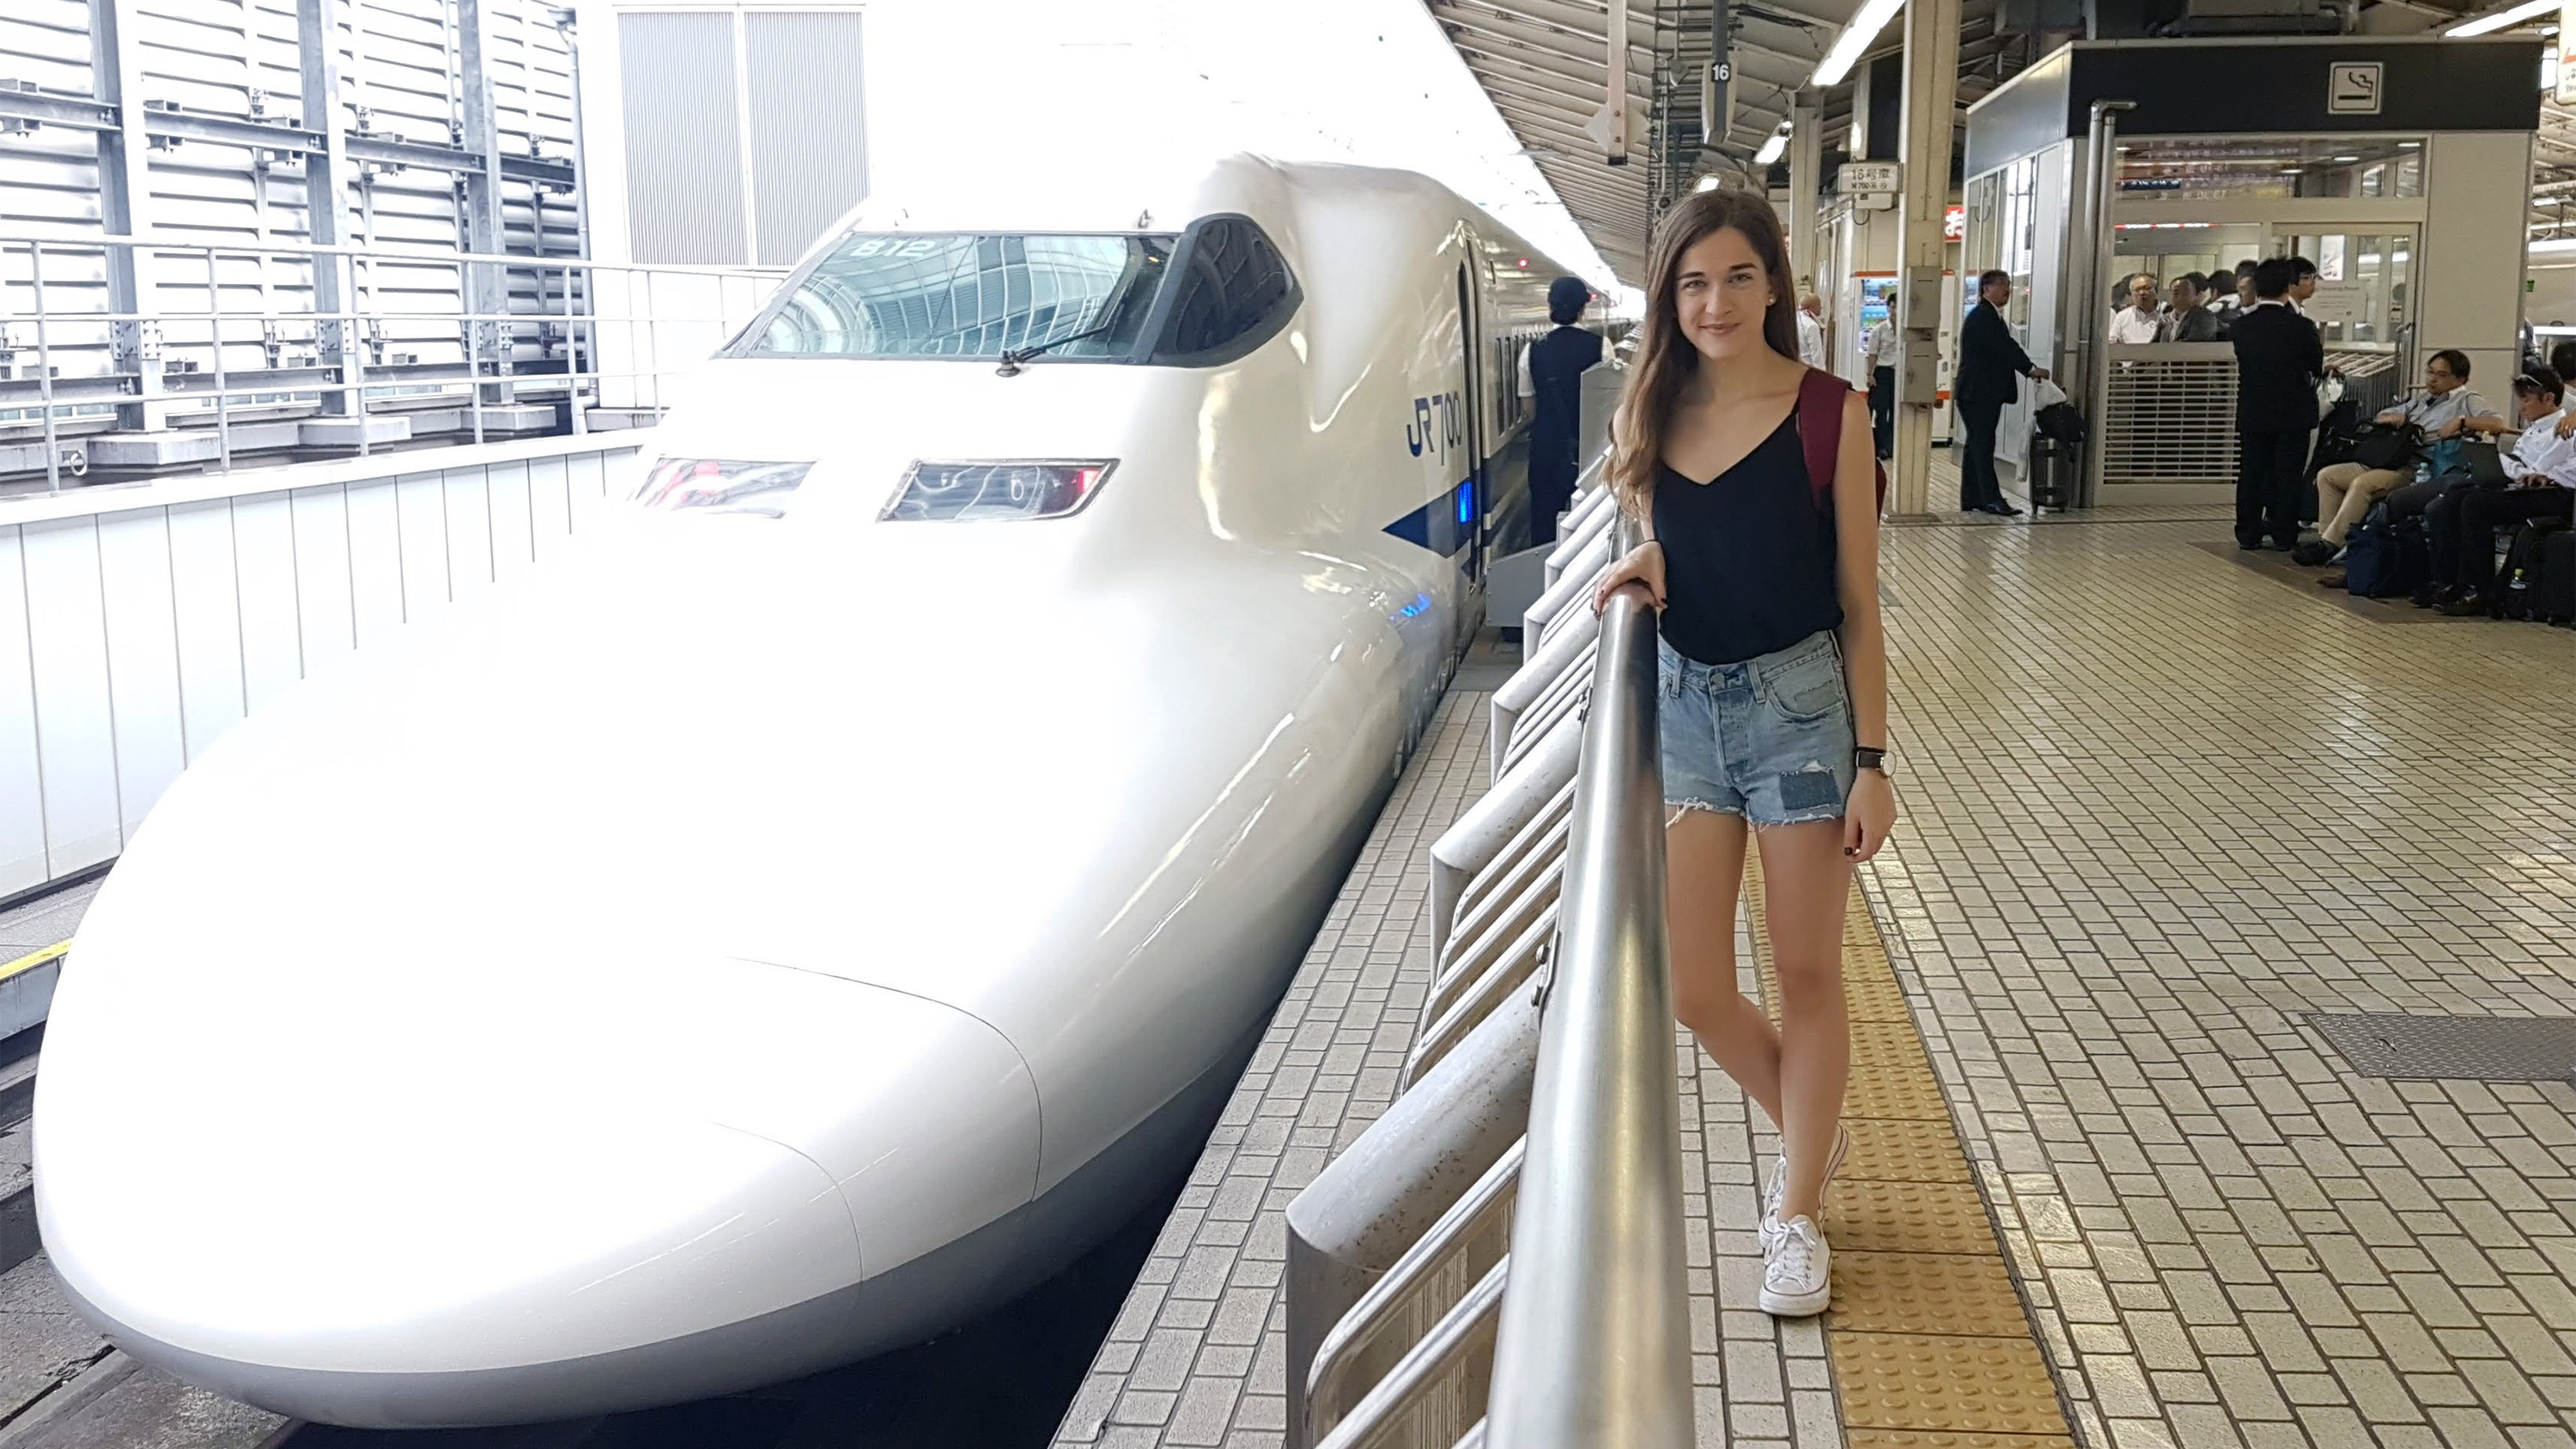 Charikleia takes advantage of studying in Hong Kong, which is easily connected to other Asian countries, to visit Japan. She poses for a photo with the iconic Shinkansen train.